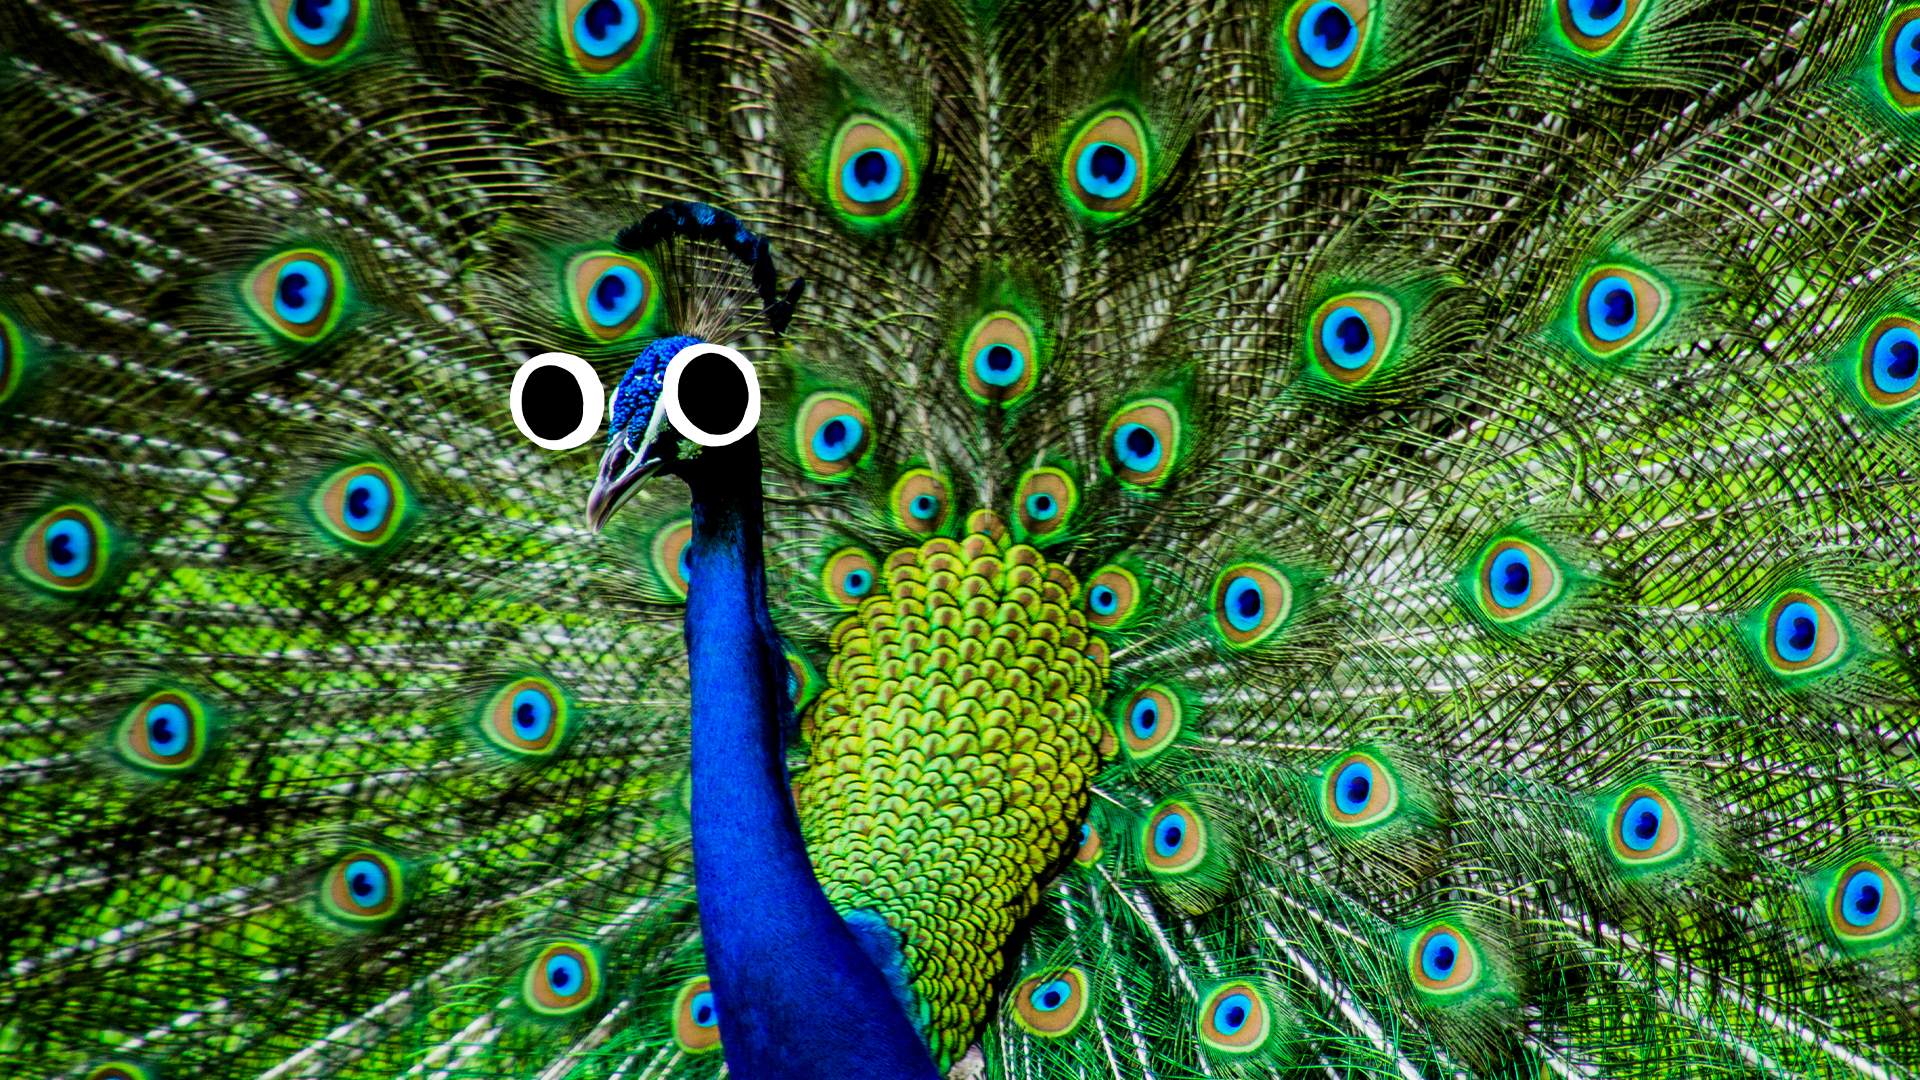 Peacock with googly eyes